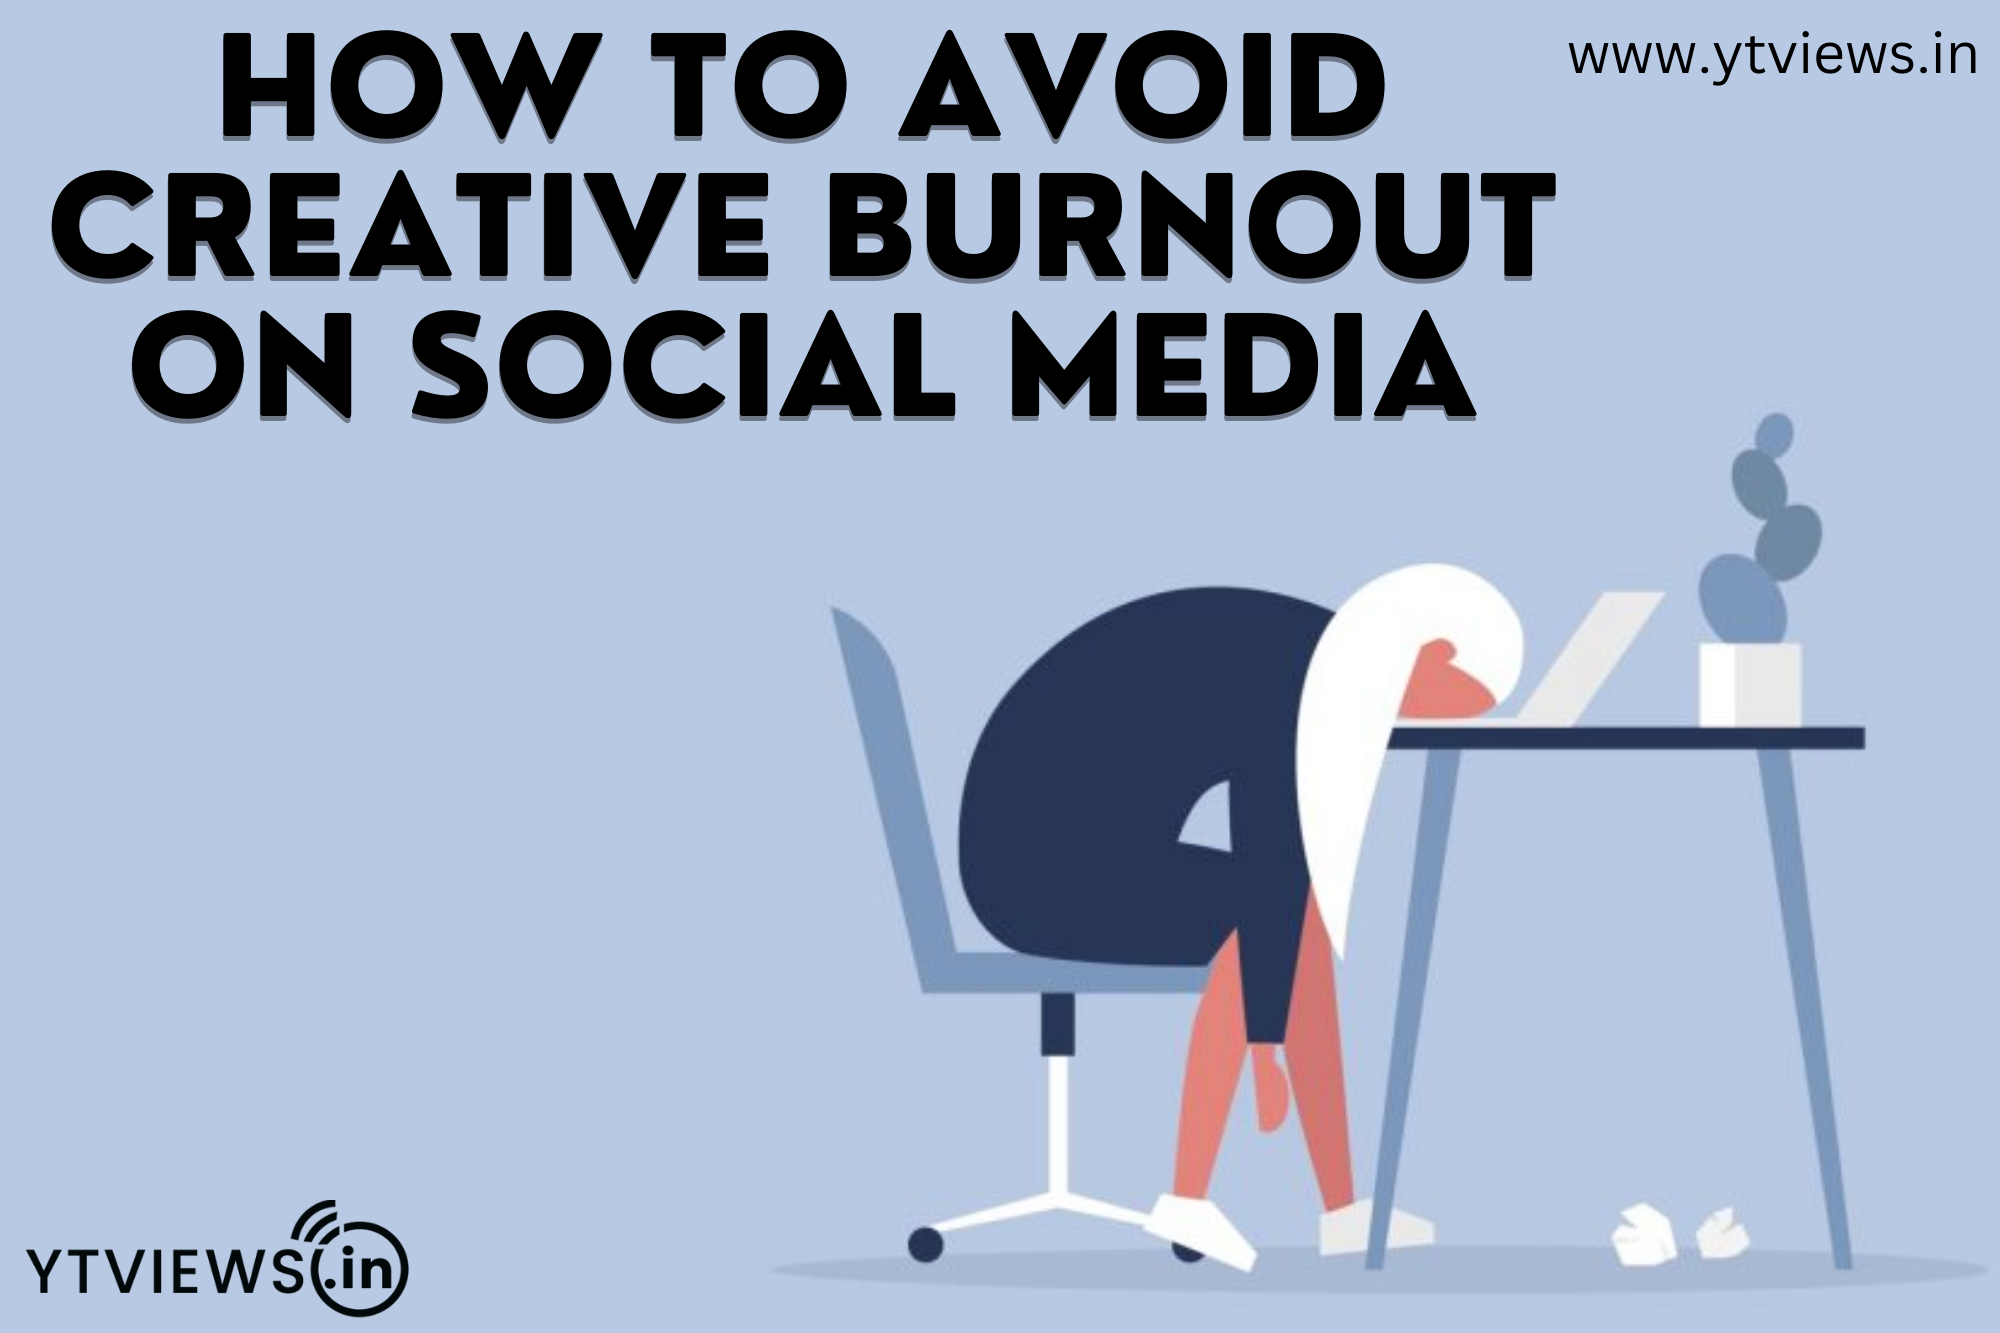 How to avoid creative burnout on social media